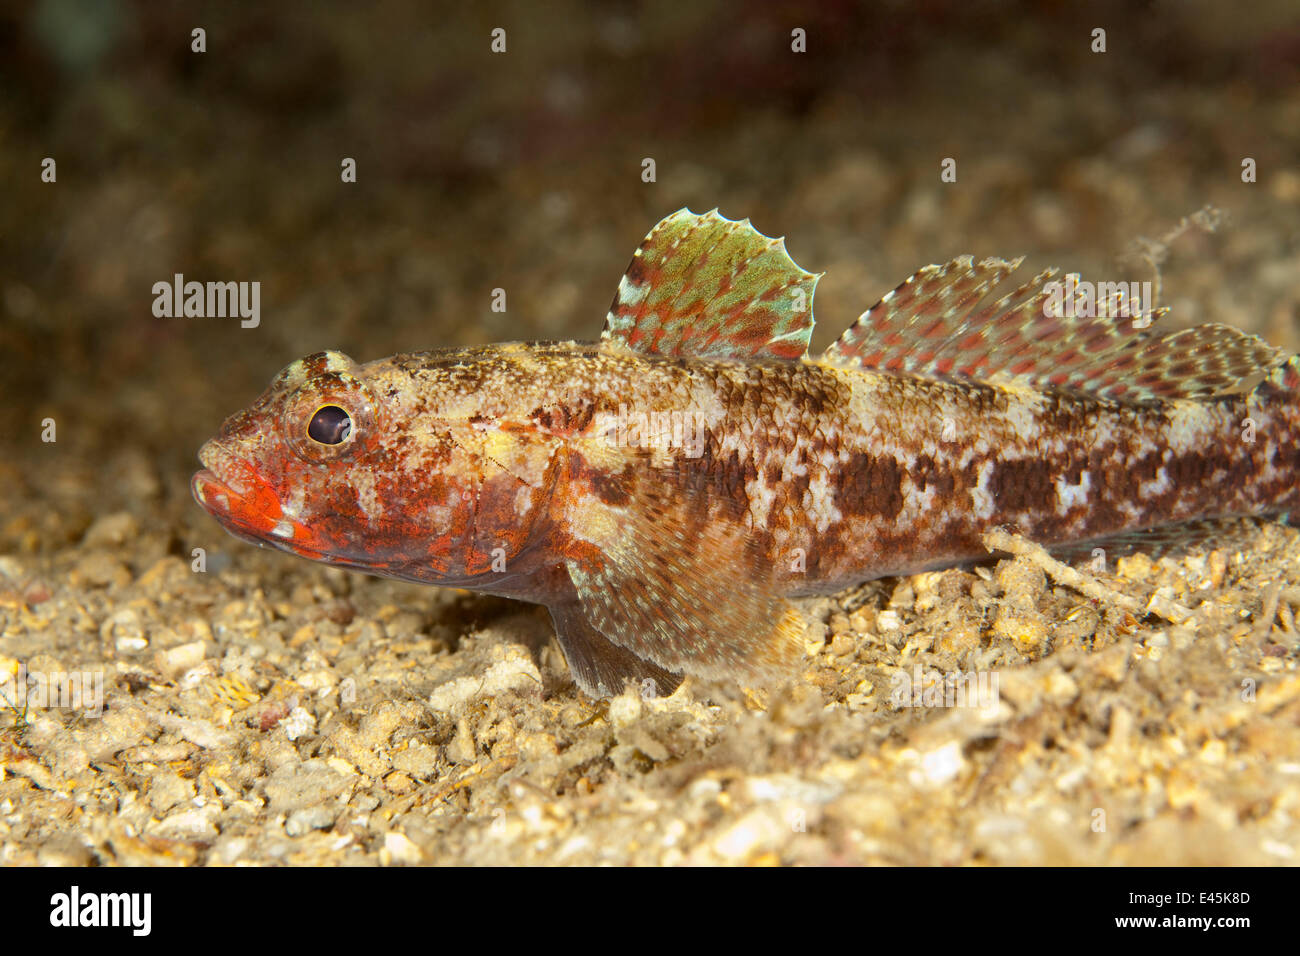 Red mouthed goby (Gobius cruentatus) on seabed, Larvotto Marine Reserve, Monaco, Mediterranean Sea, July 2009 Stock Photo